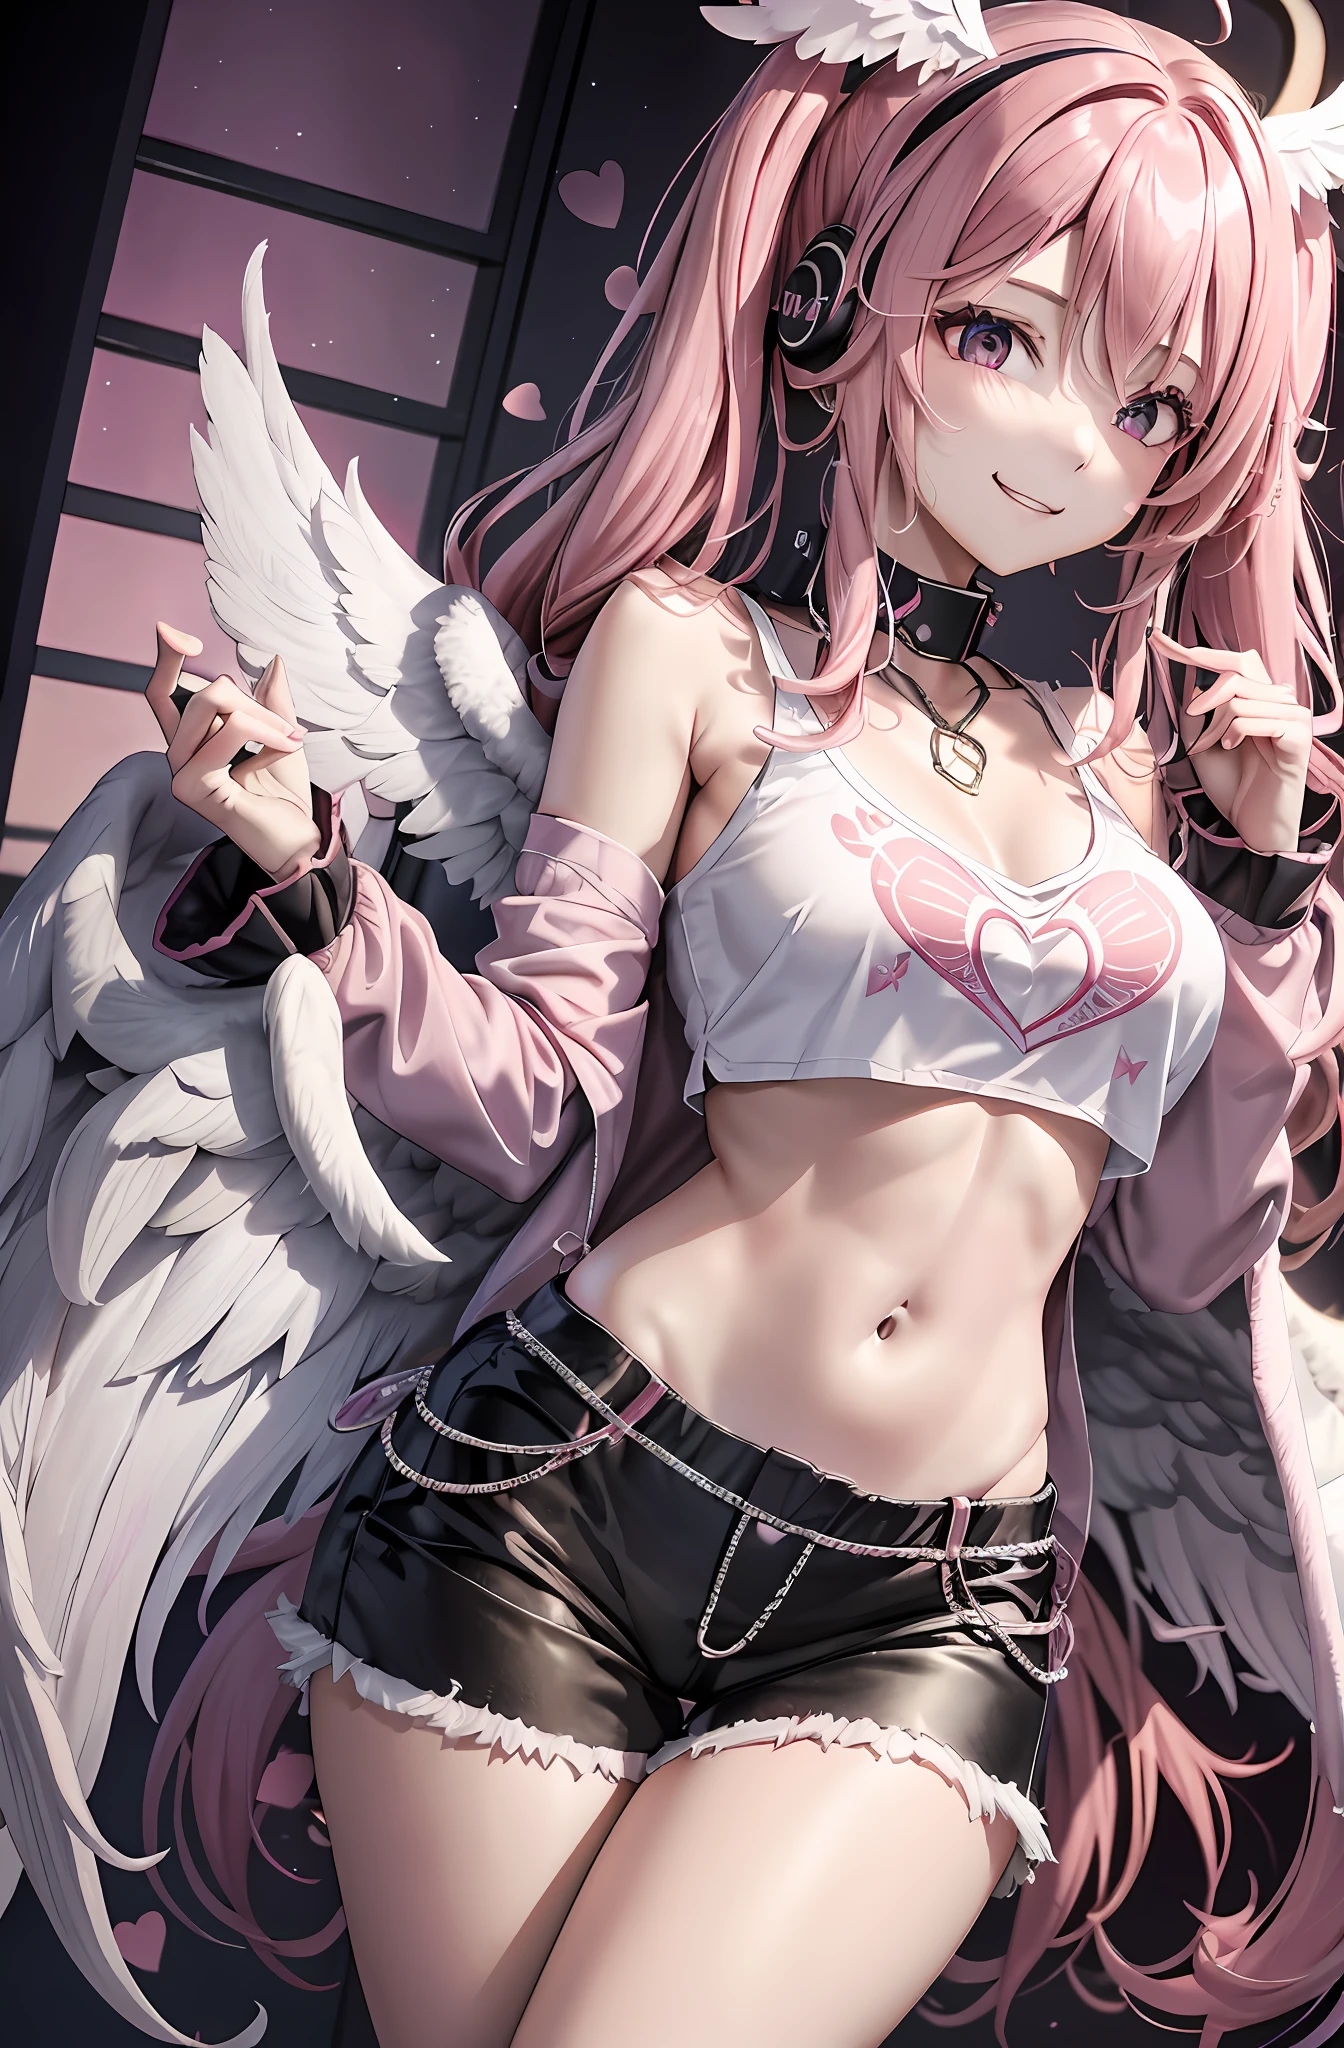 Pink hair. Long hair. Pigtails. Long pants that are cut off. Parka. Earring. Angel wings. Heart-shaped vacant chest. Heart logo. A big smile. Game Center. Headphone. White wings. Navel. Futomo. Navel out.